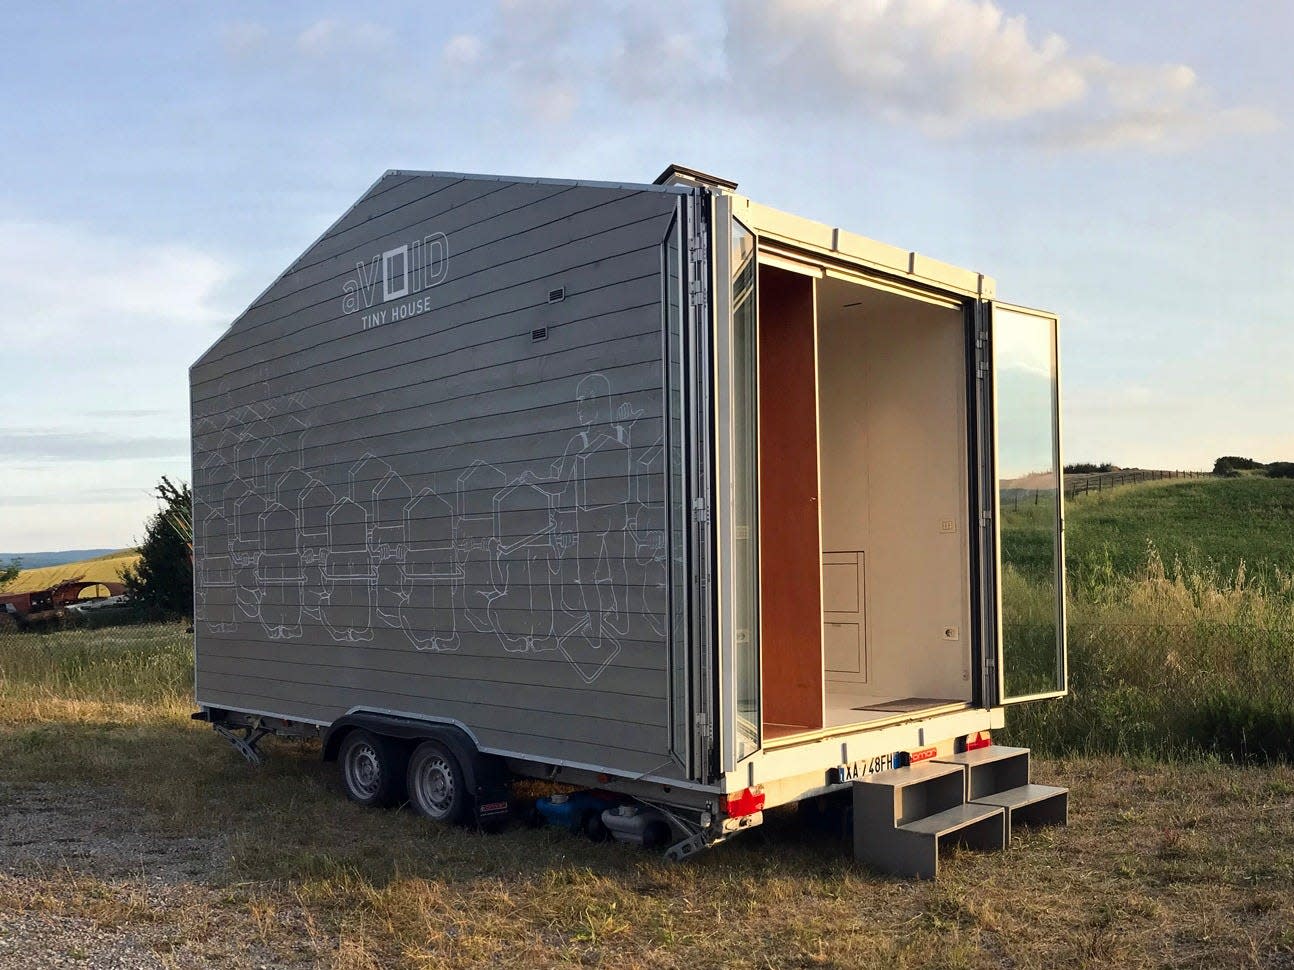 This 97-square-foot tiny home on wheels has all of its furniture stored in the walls to save space — see inside the ,000 minimalist aVOID